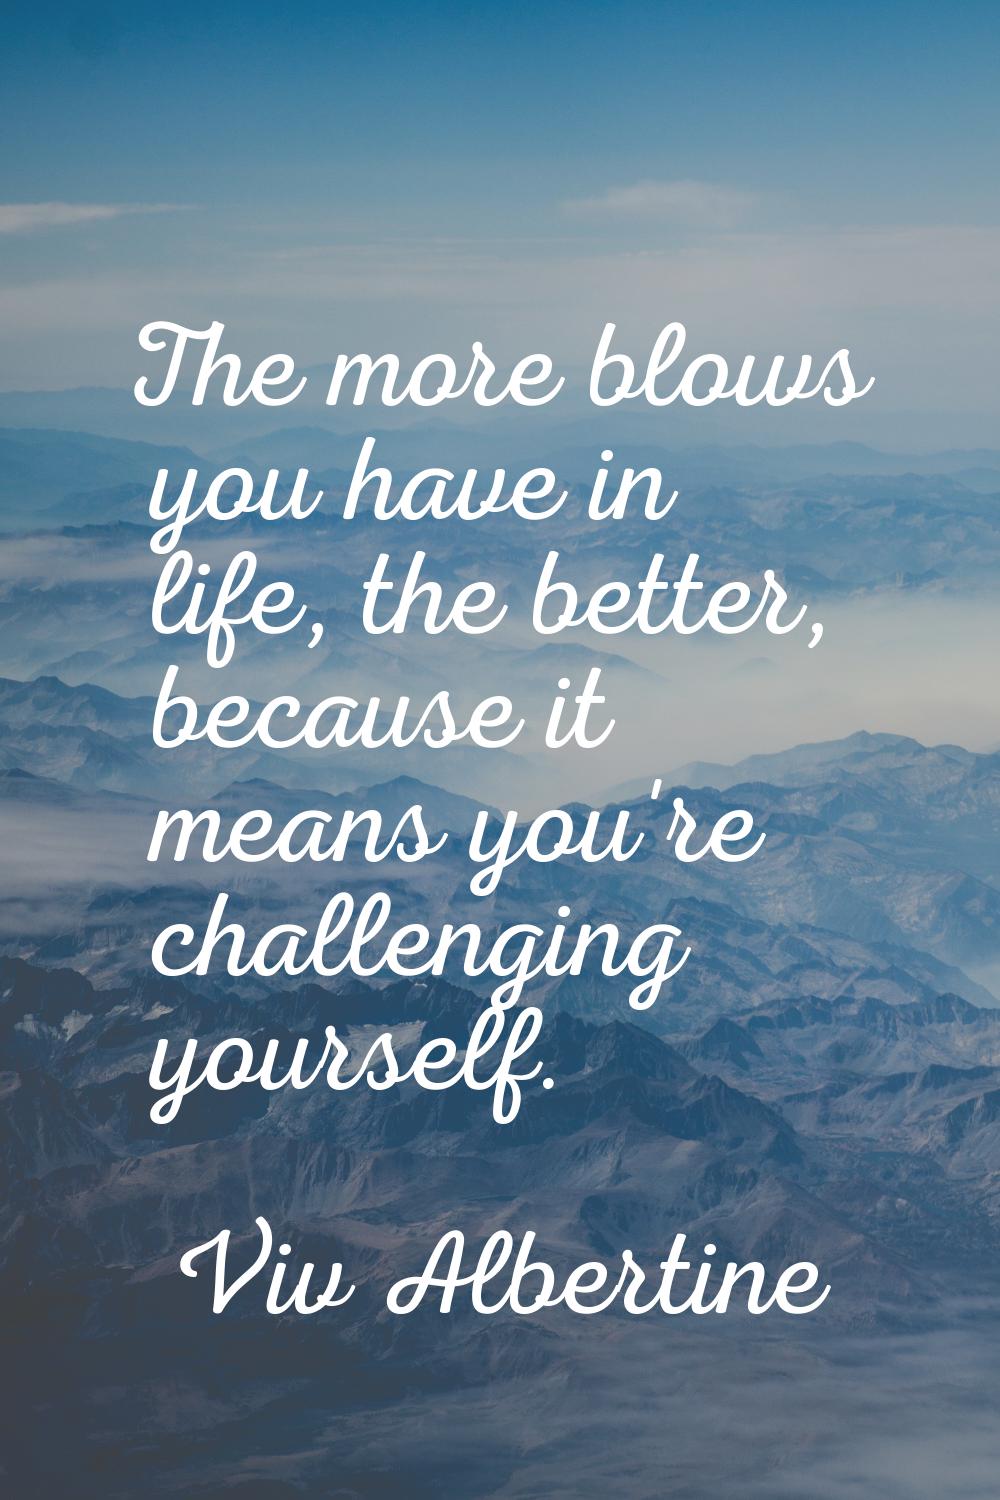 The more blows you have in life, the better, because it means you're challenging yourself.